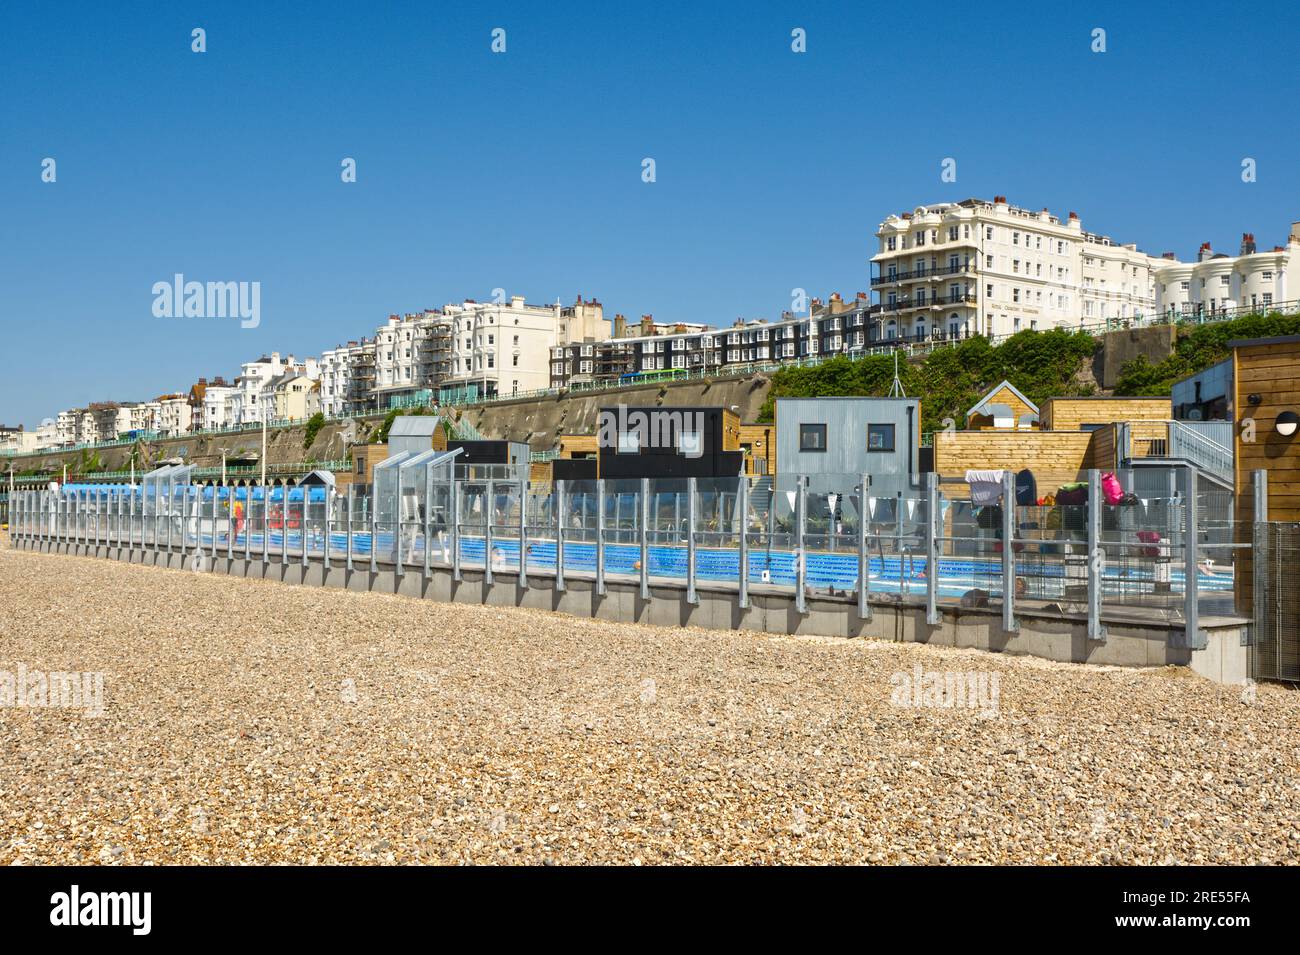 New swimming pool. restaurants and cafes on the beach at Brighton, East Sussex, England. With people in pool and cafe. Stock Photo